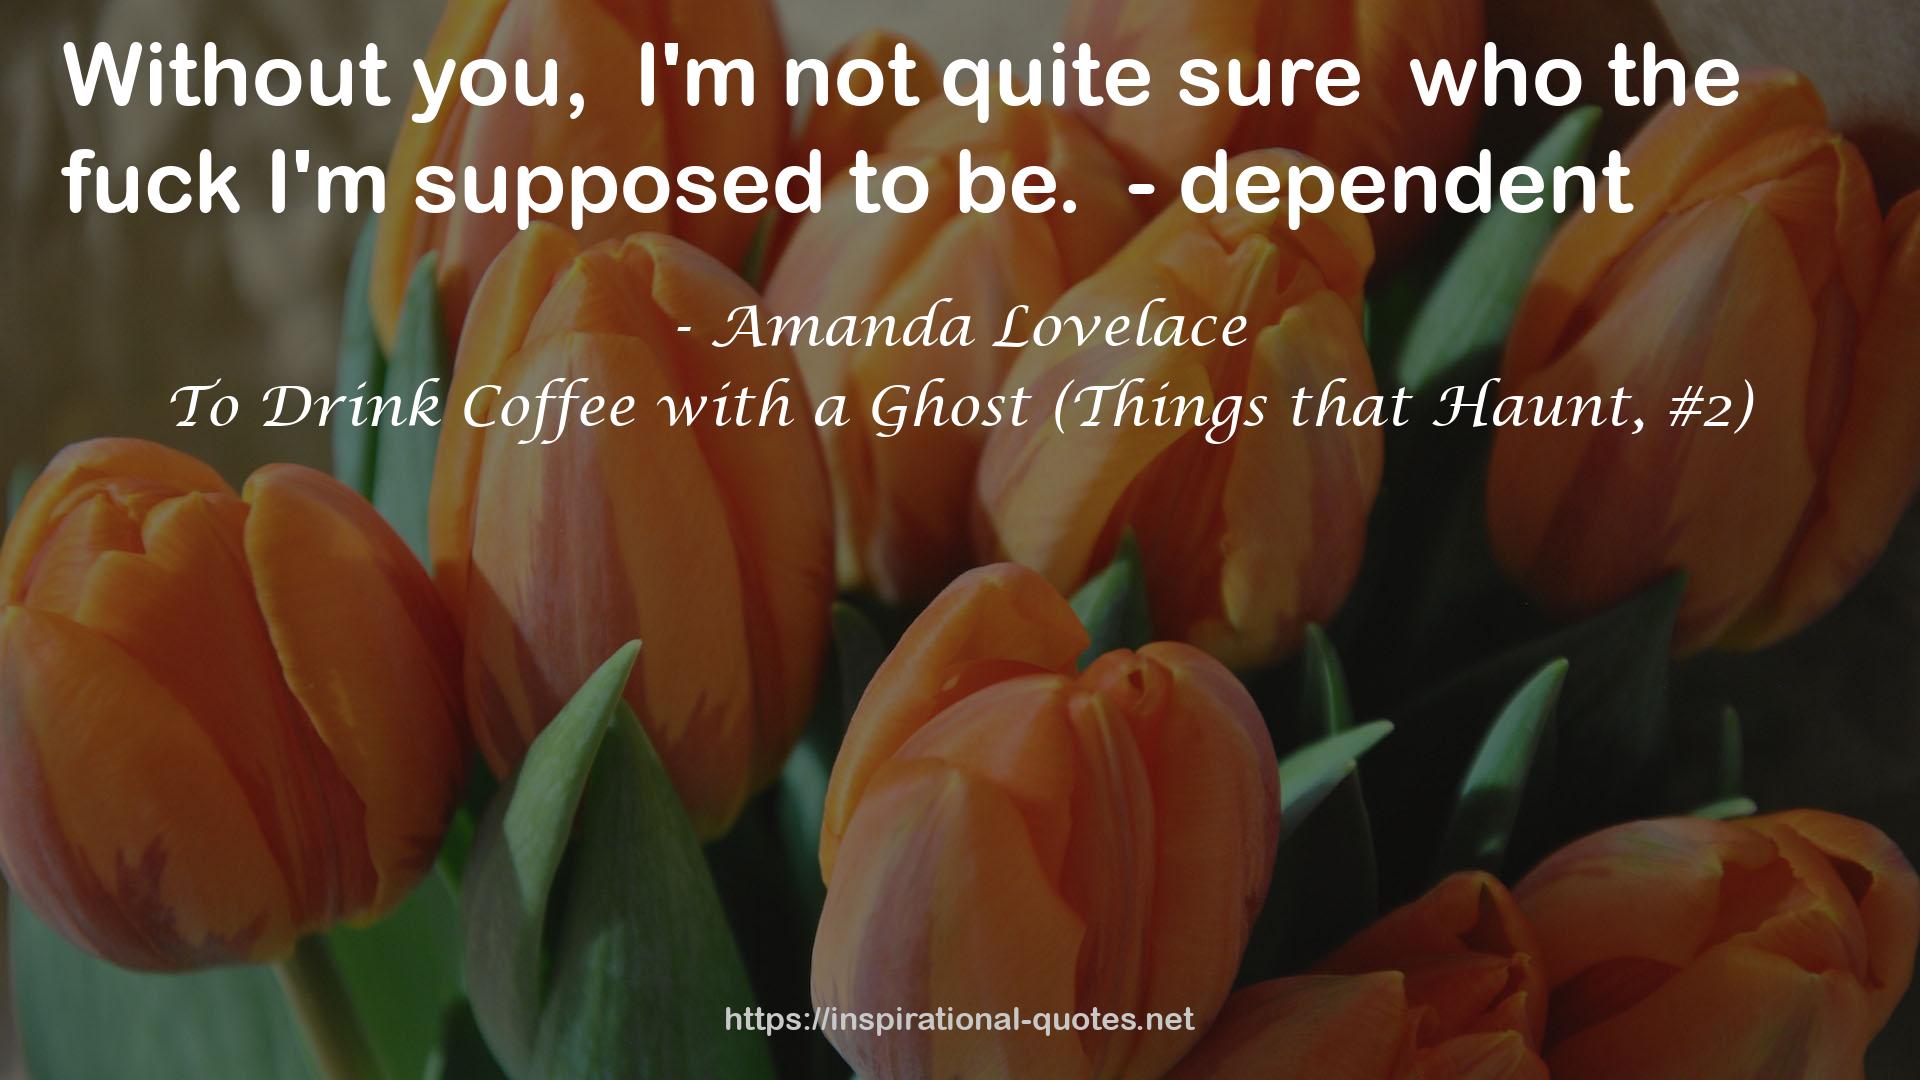 To Drink Coffee with a Ghost (Things that Haunt, #2) QUOTES